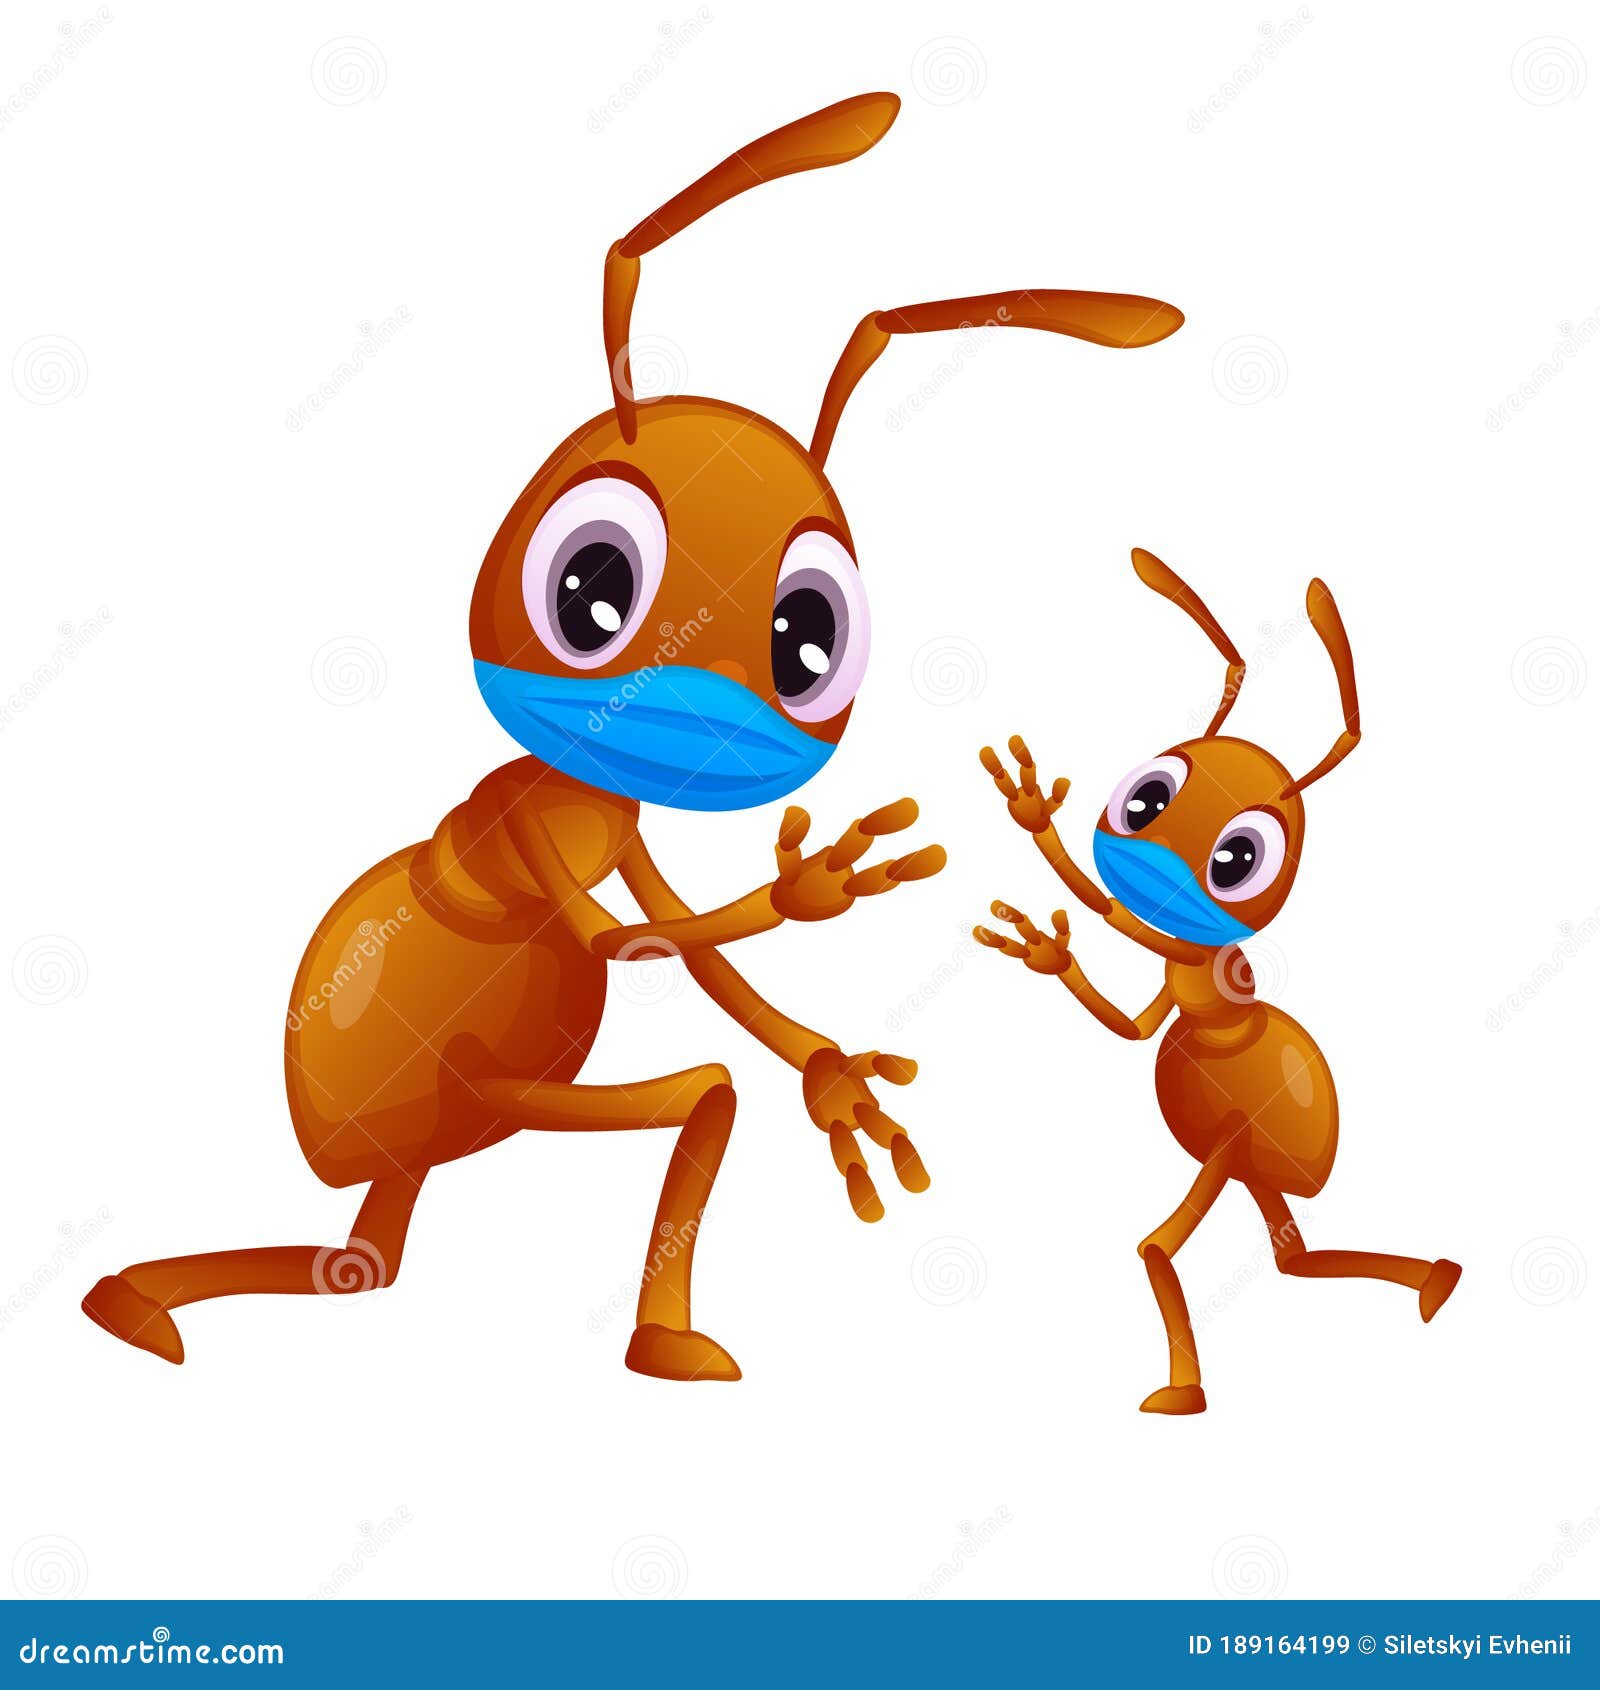 https://thumbs.dreamstime.com/z/big-ant-playing-its-child-wearing-face-mask-cartoon-characters-small-both-masks-covid-quarantine-189164199.jpg